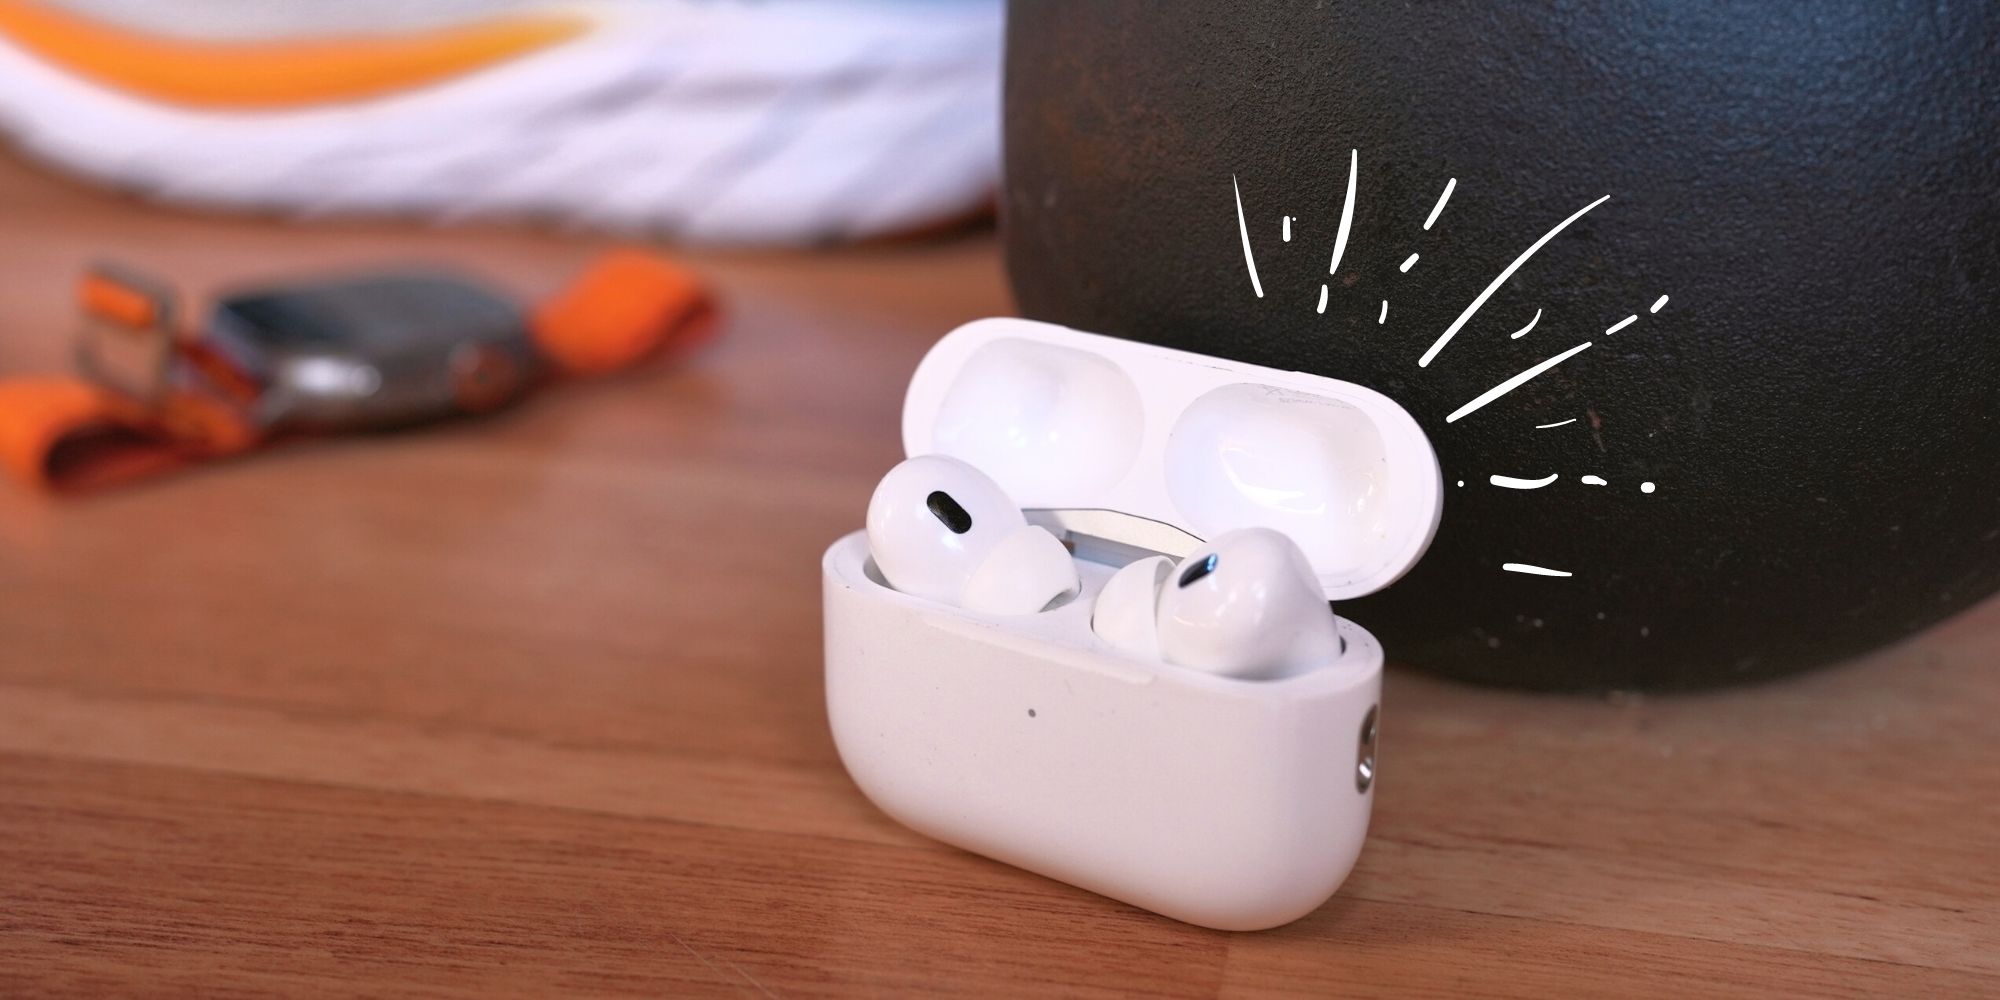 AirPods Pro 2 may be harder to find for the holidays as Apple loses one supplier over possible production issues